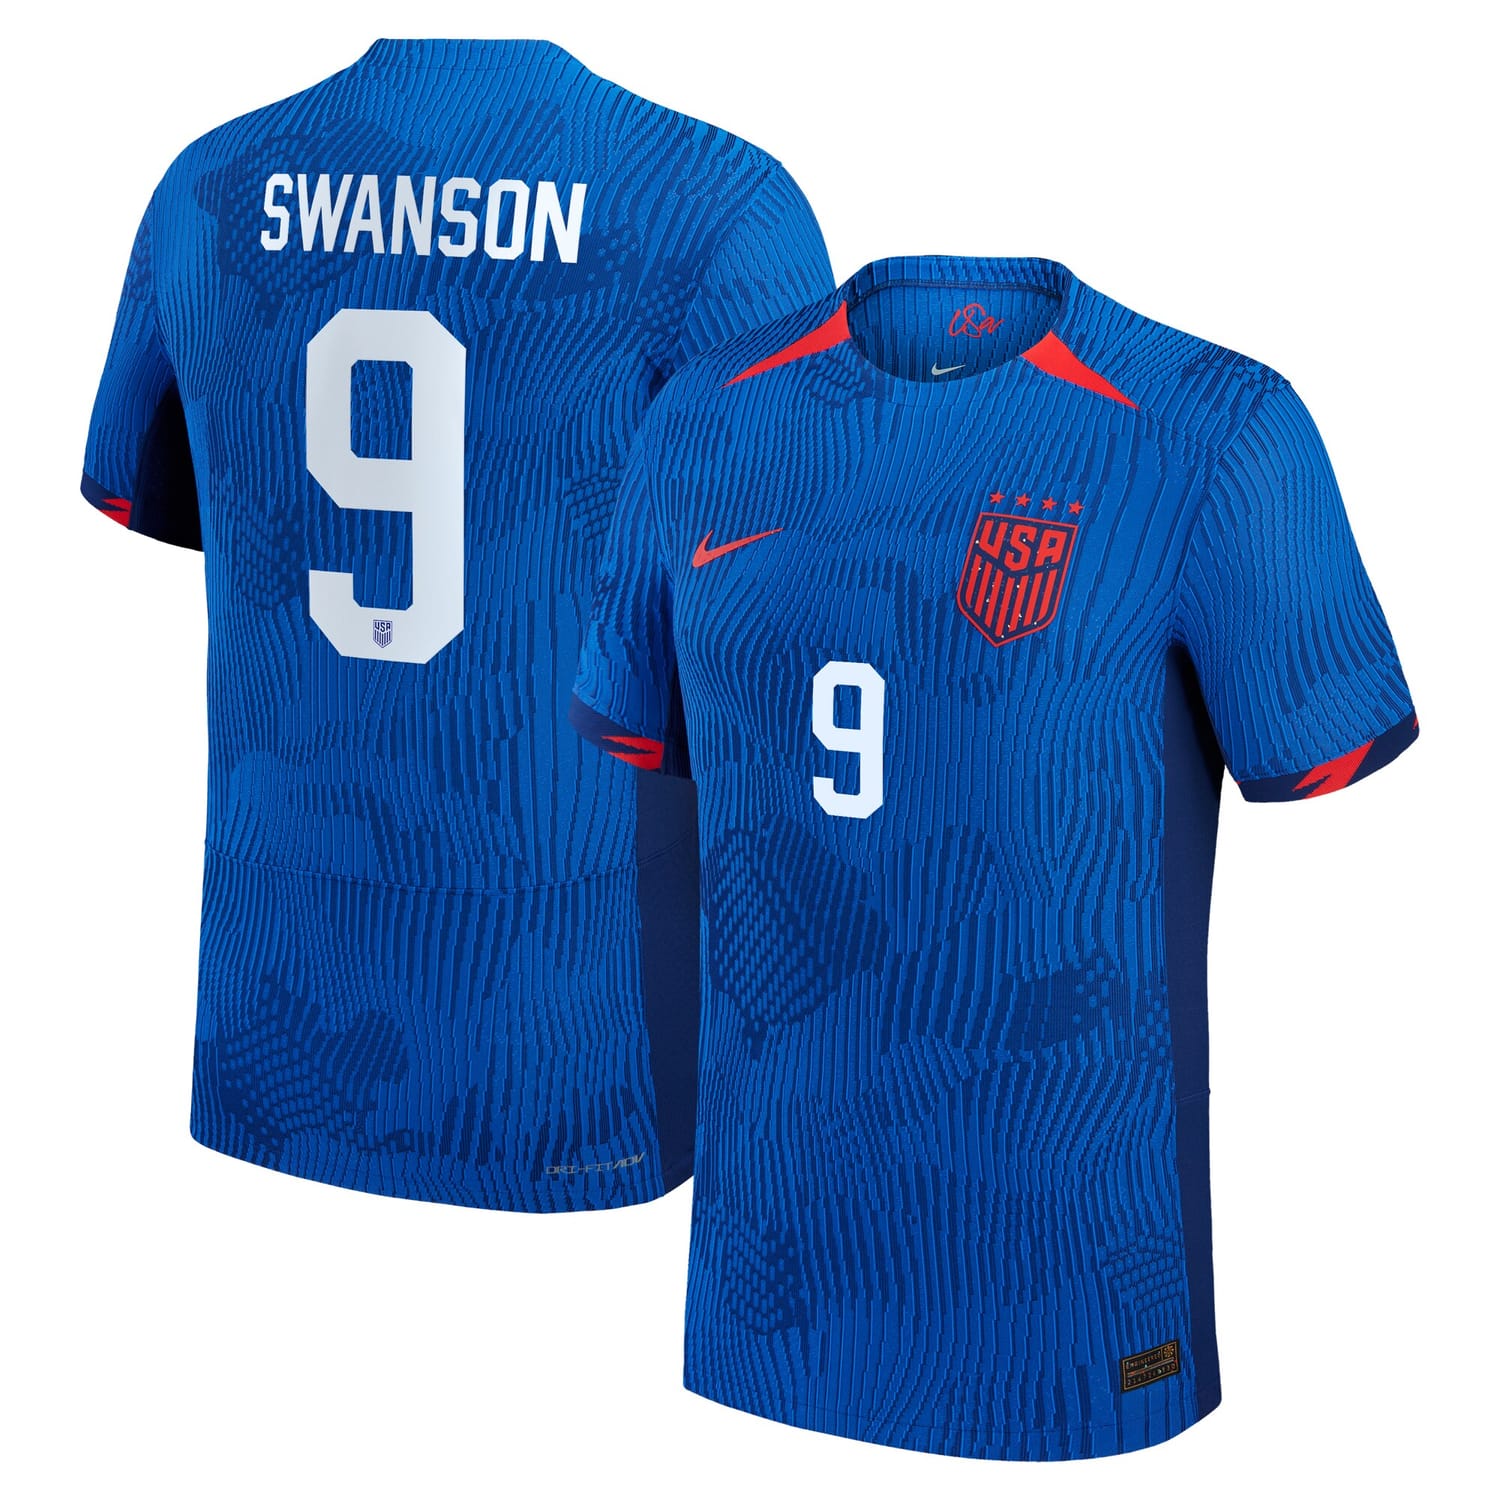 USWNT Away Authentic Jersey Shirt Royal 2023 player Mallory Swanson printing for Men